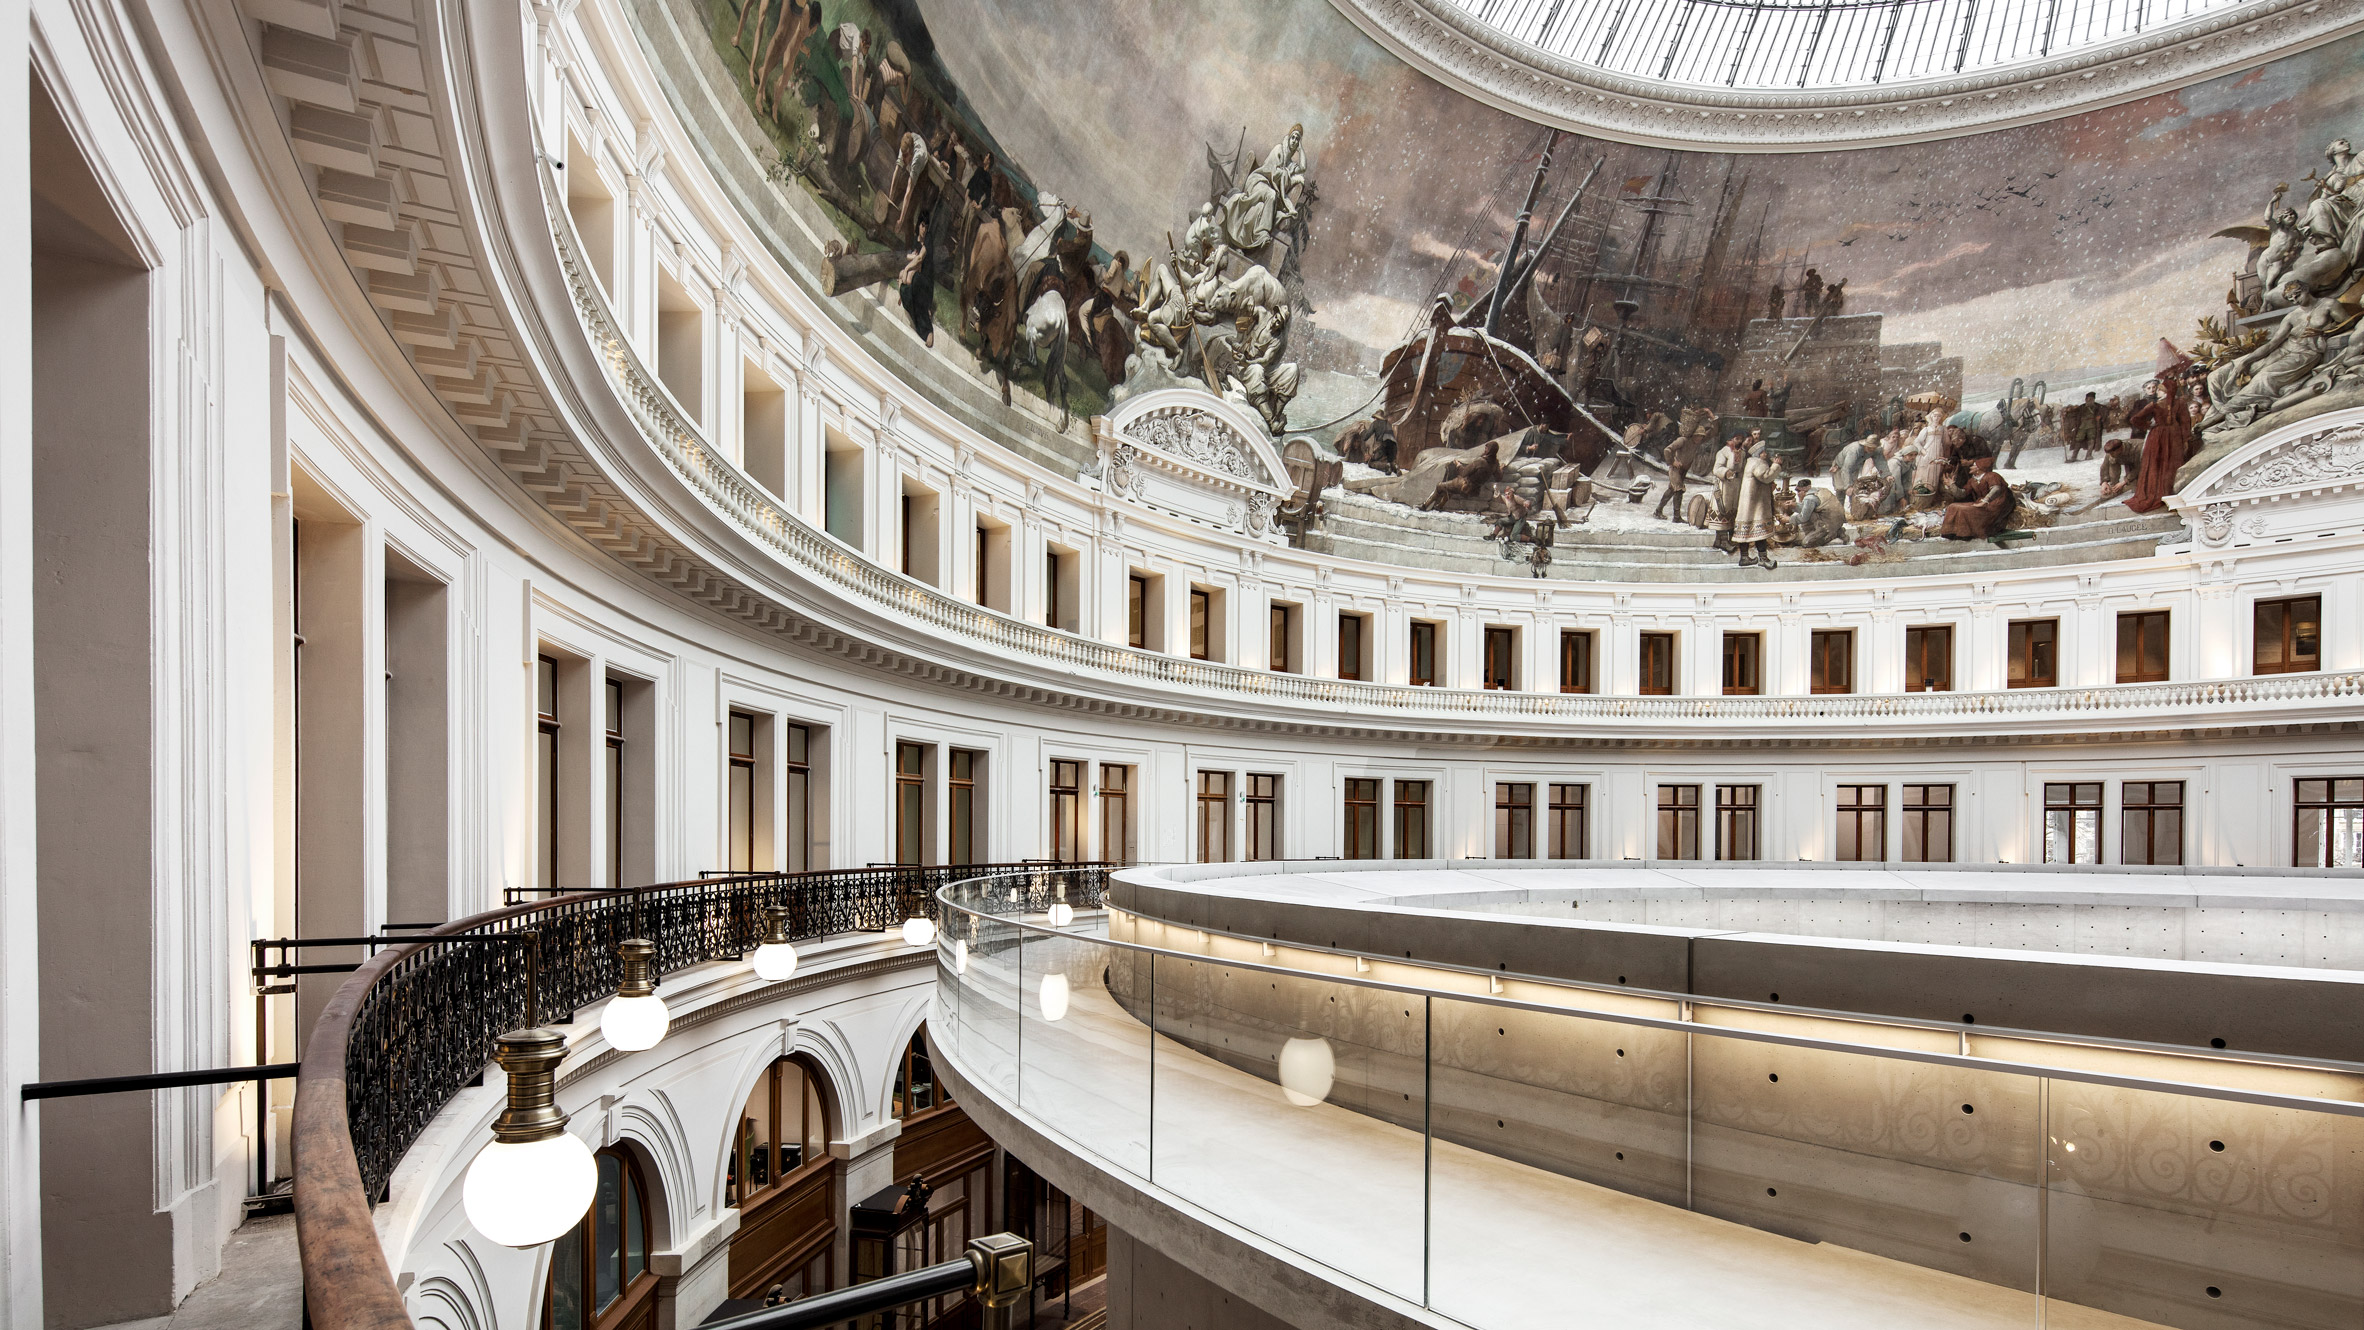 Interior view of the restored and redesigned rotunda